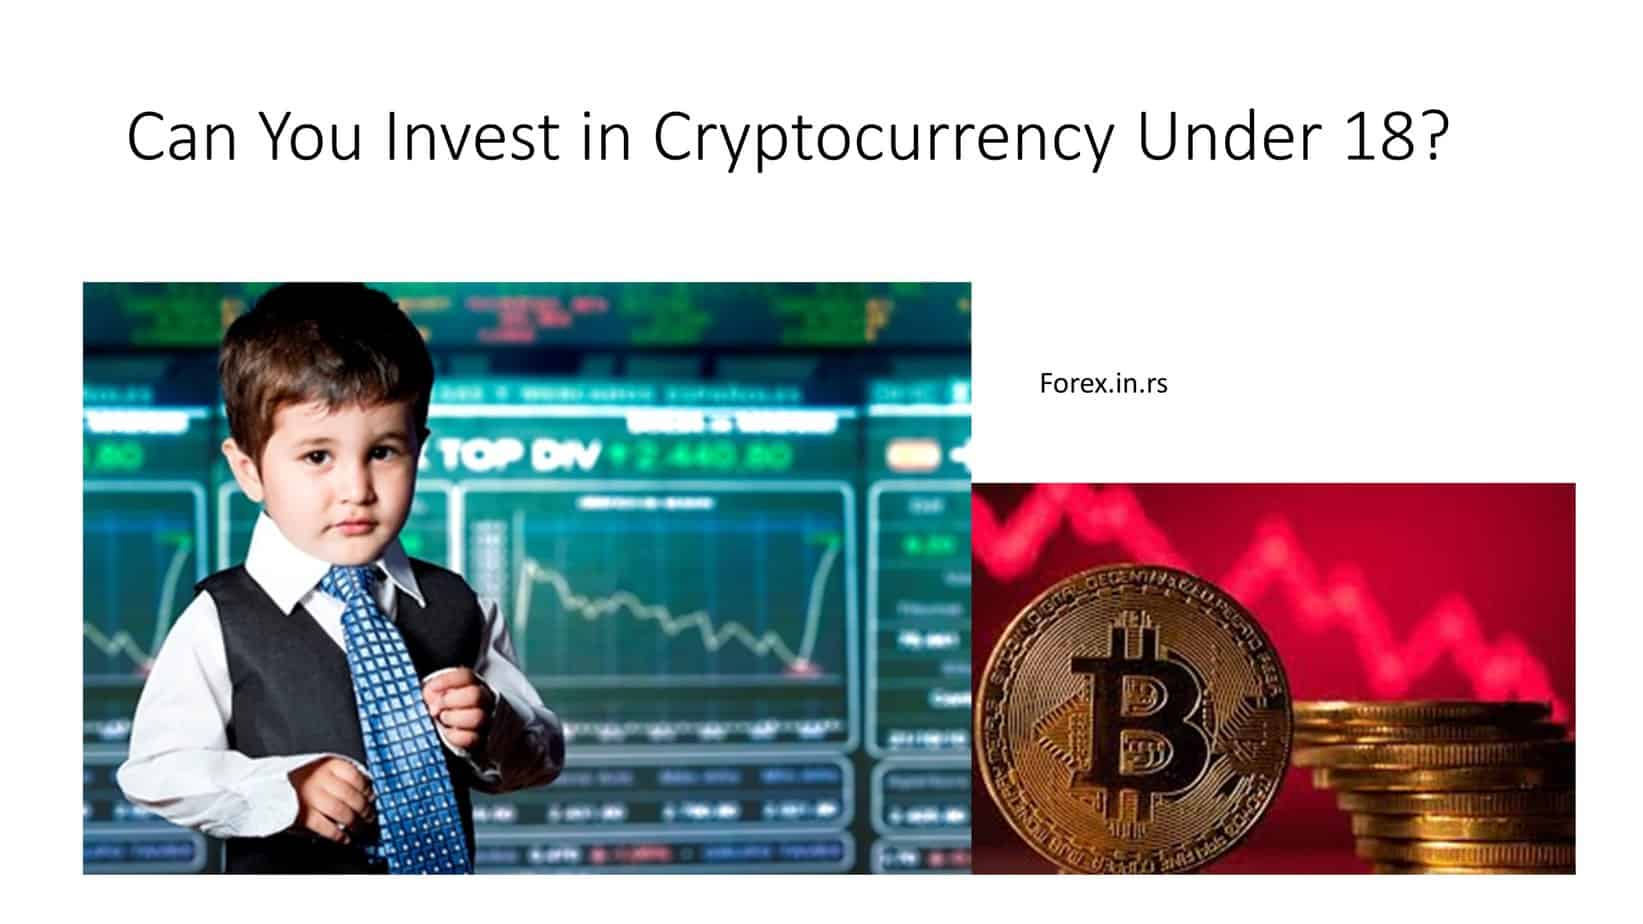 Can You Invest in Cryptocurrency Under 18?